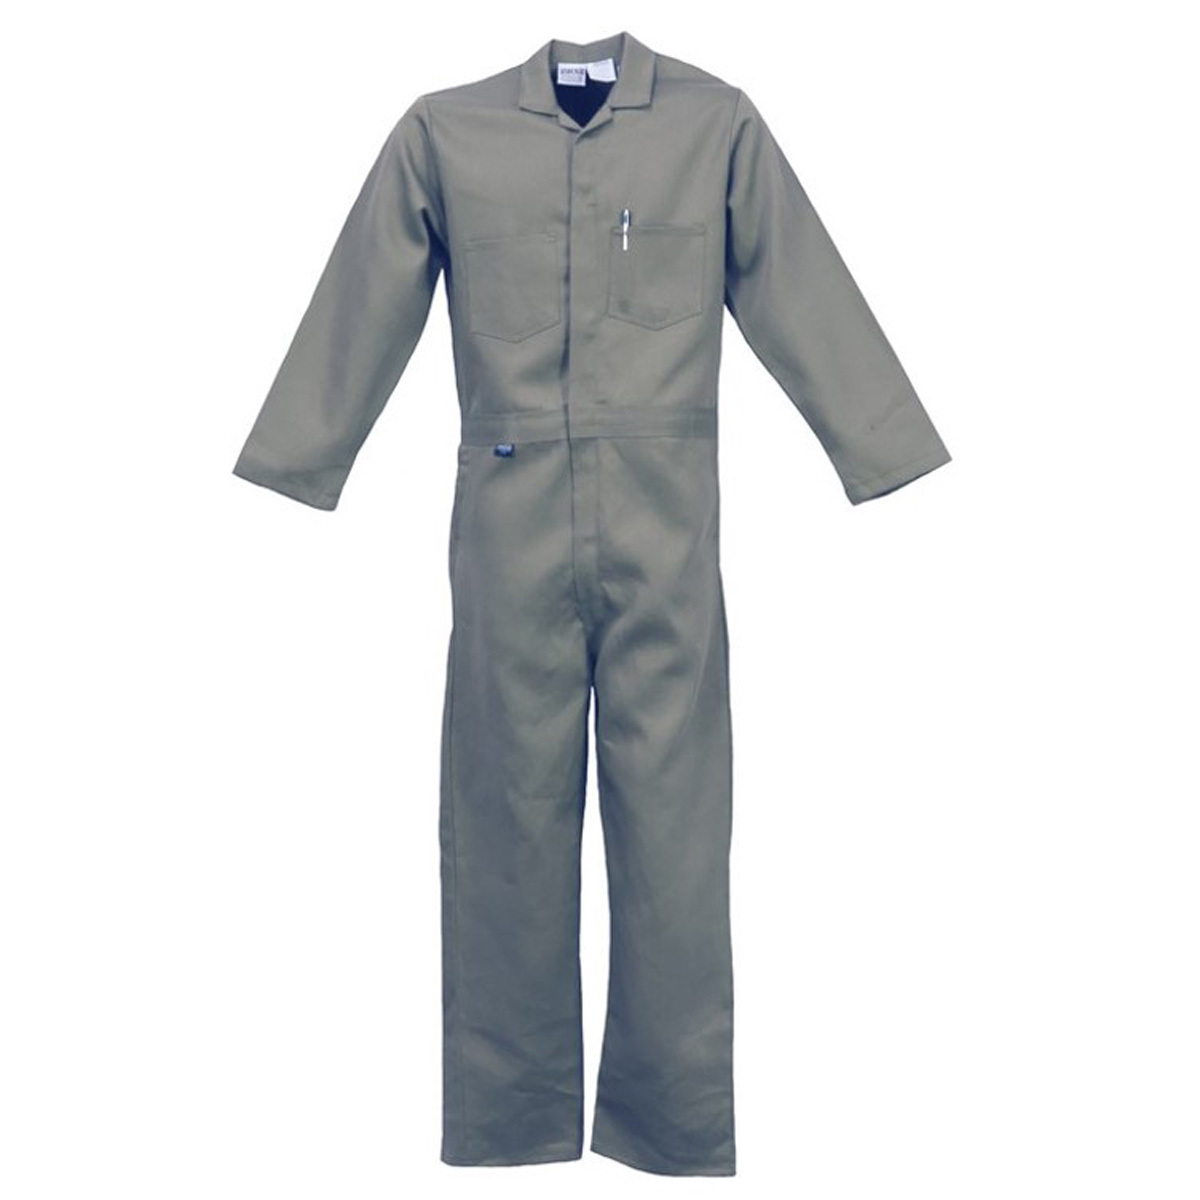 Stanco Safety Products™ Size 4X Gray Indura® Arc Rated Flame Resistant Coveralls With Front Zipper Closure